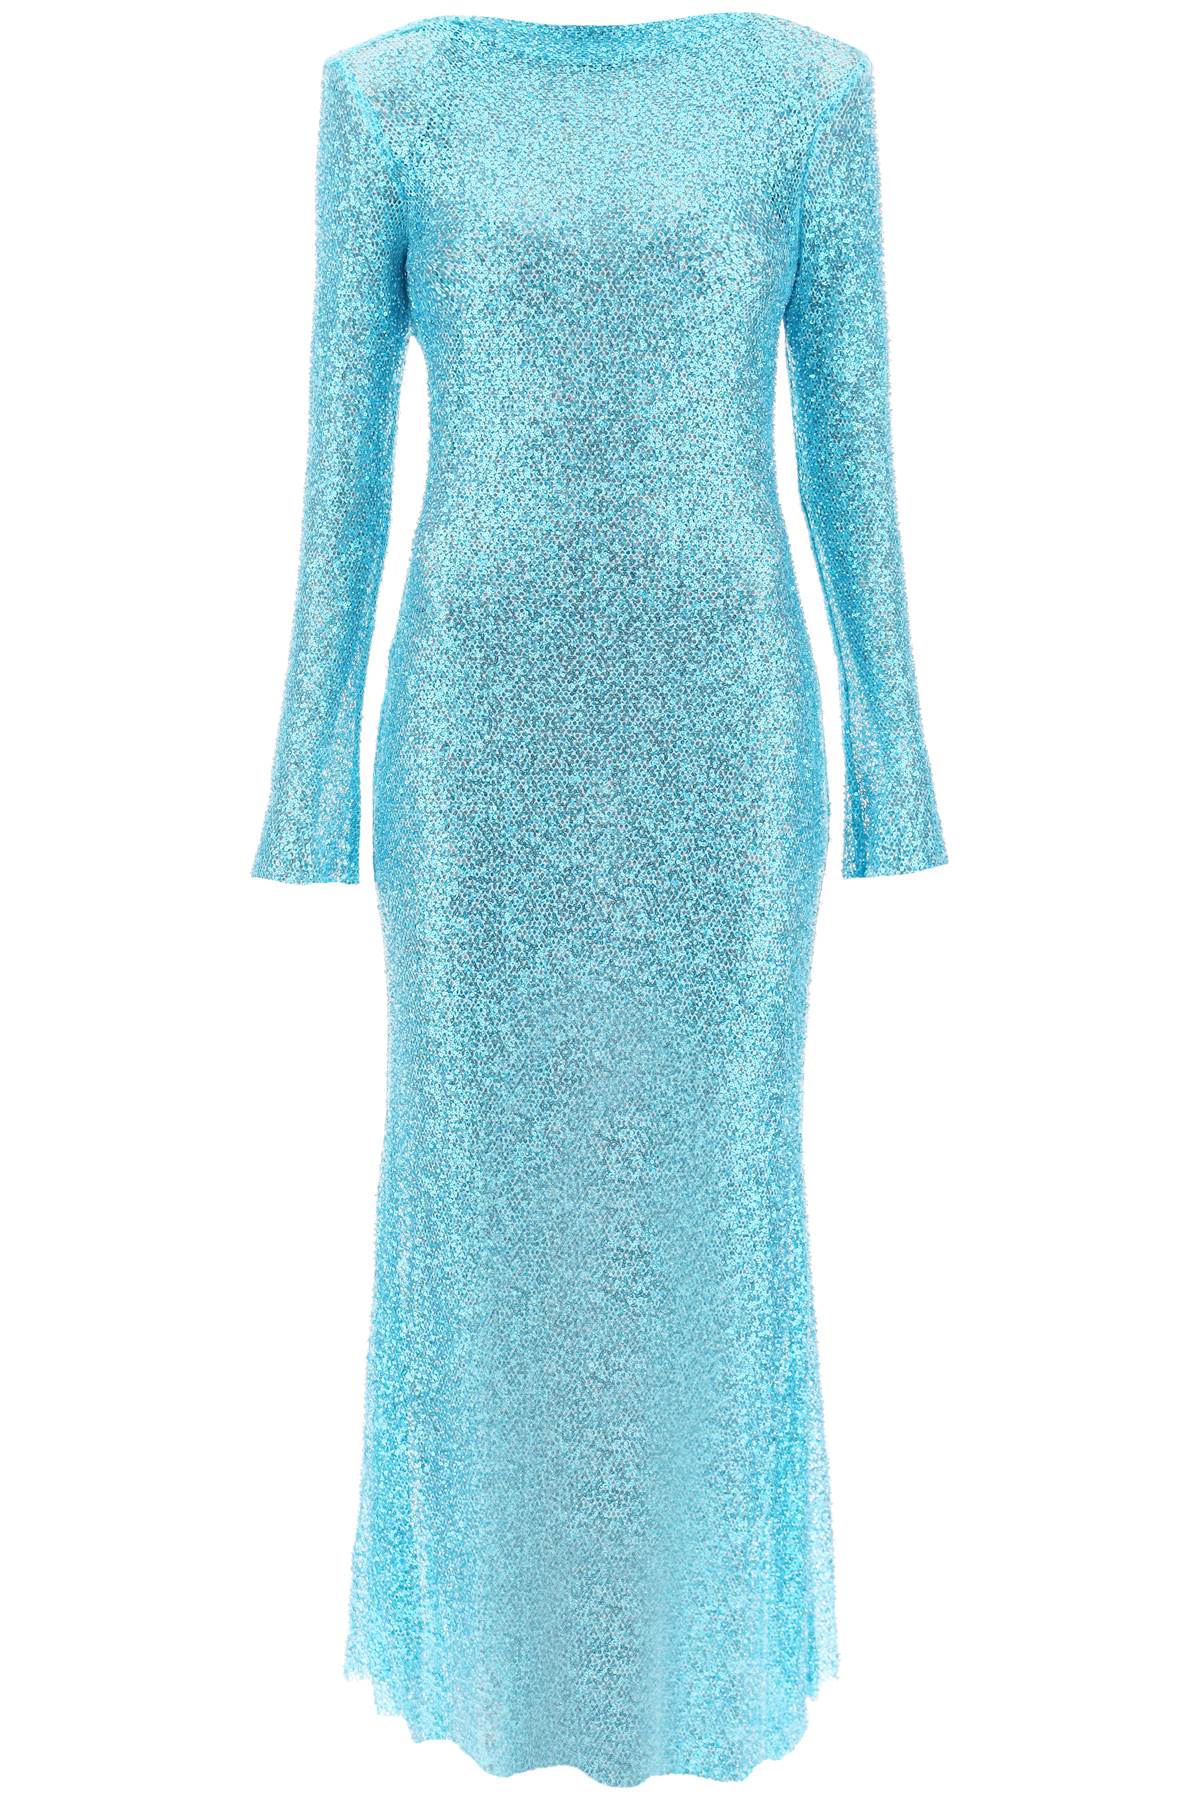 Self portrait long-sleeved maxi dress with sequins and beads PF23 109X BL BLUE